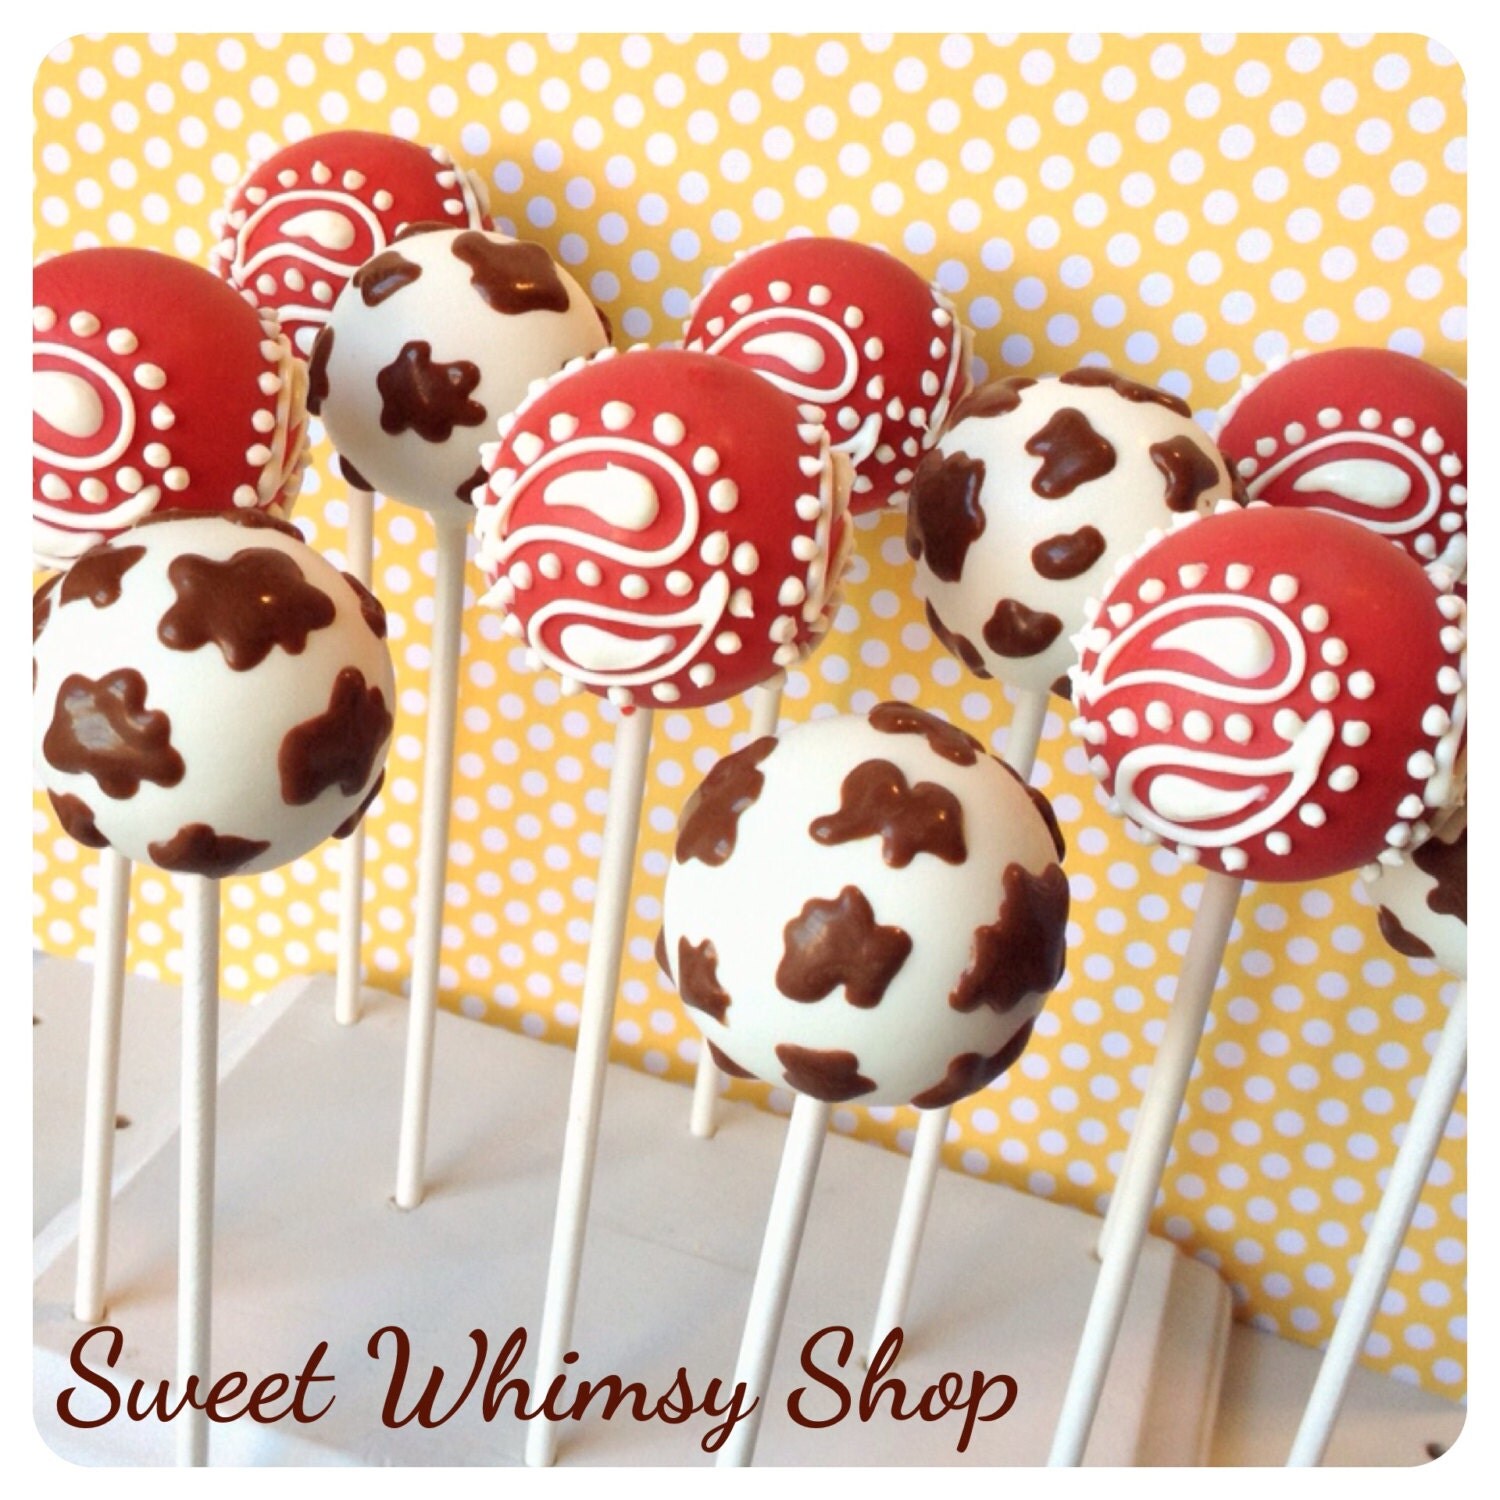 12 Cowboy or Cowgirl Cake Pops with Cow & Paisley Bandana